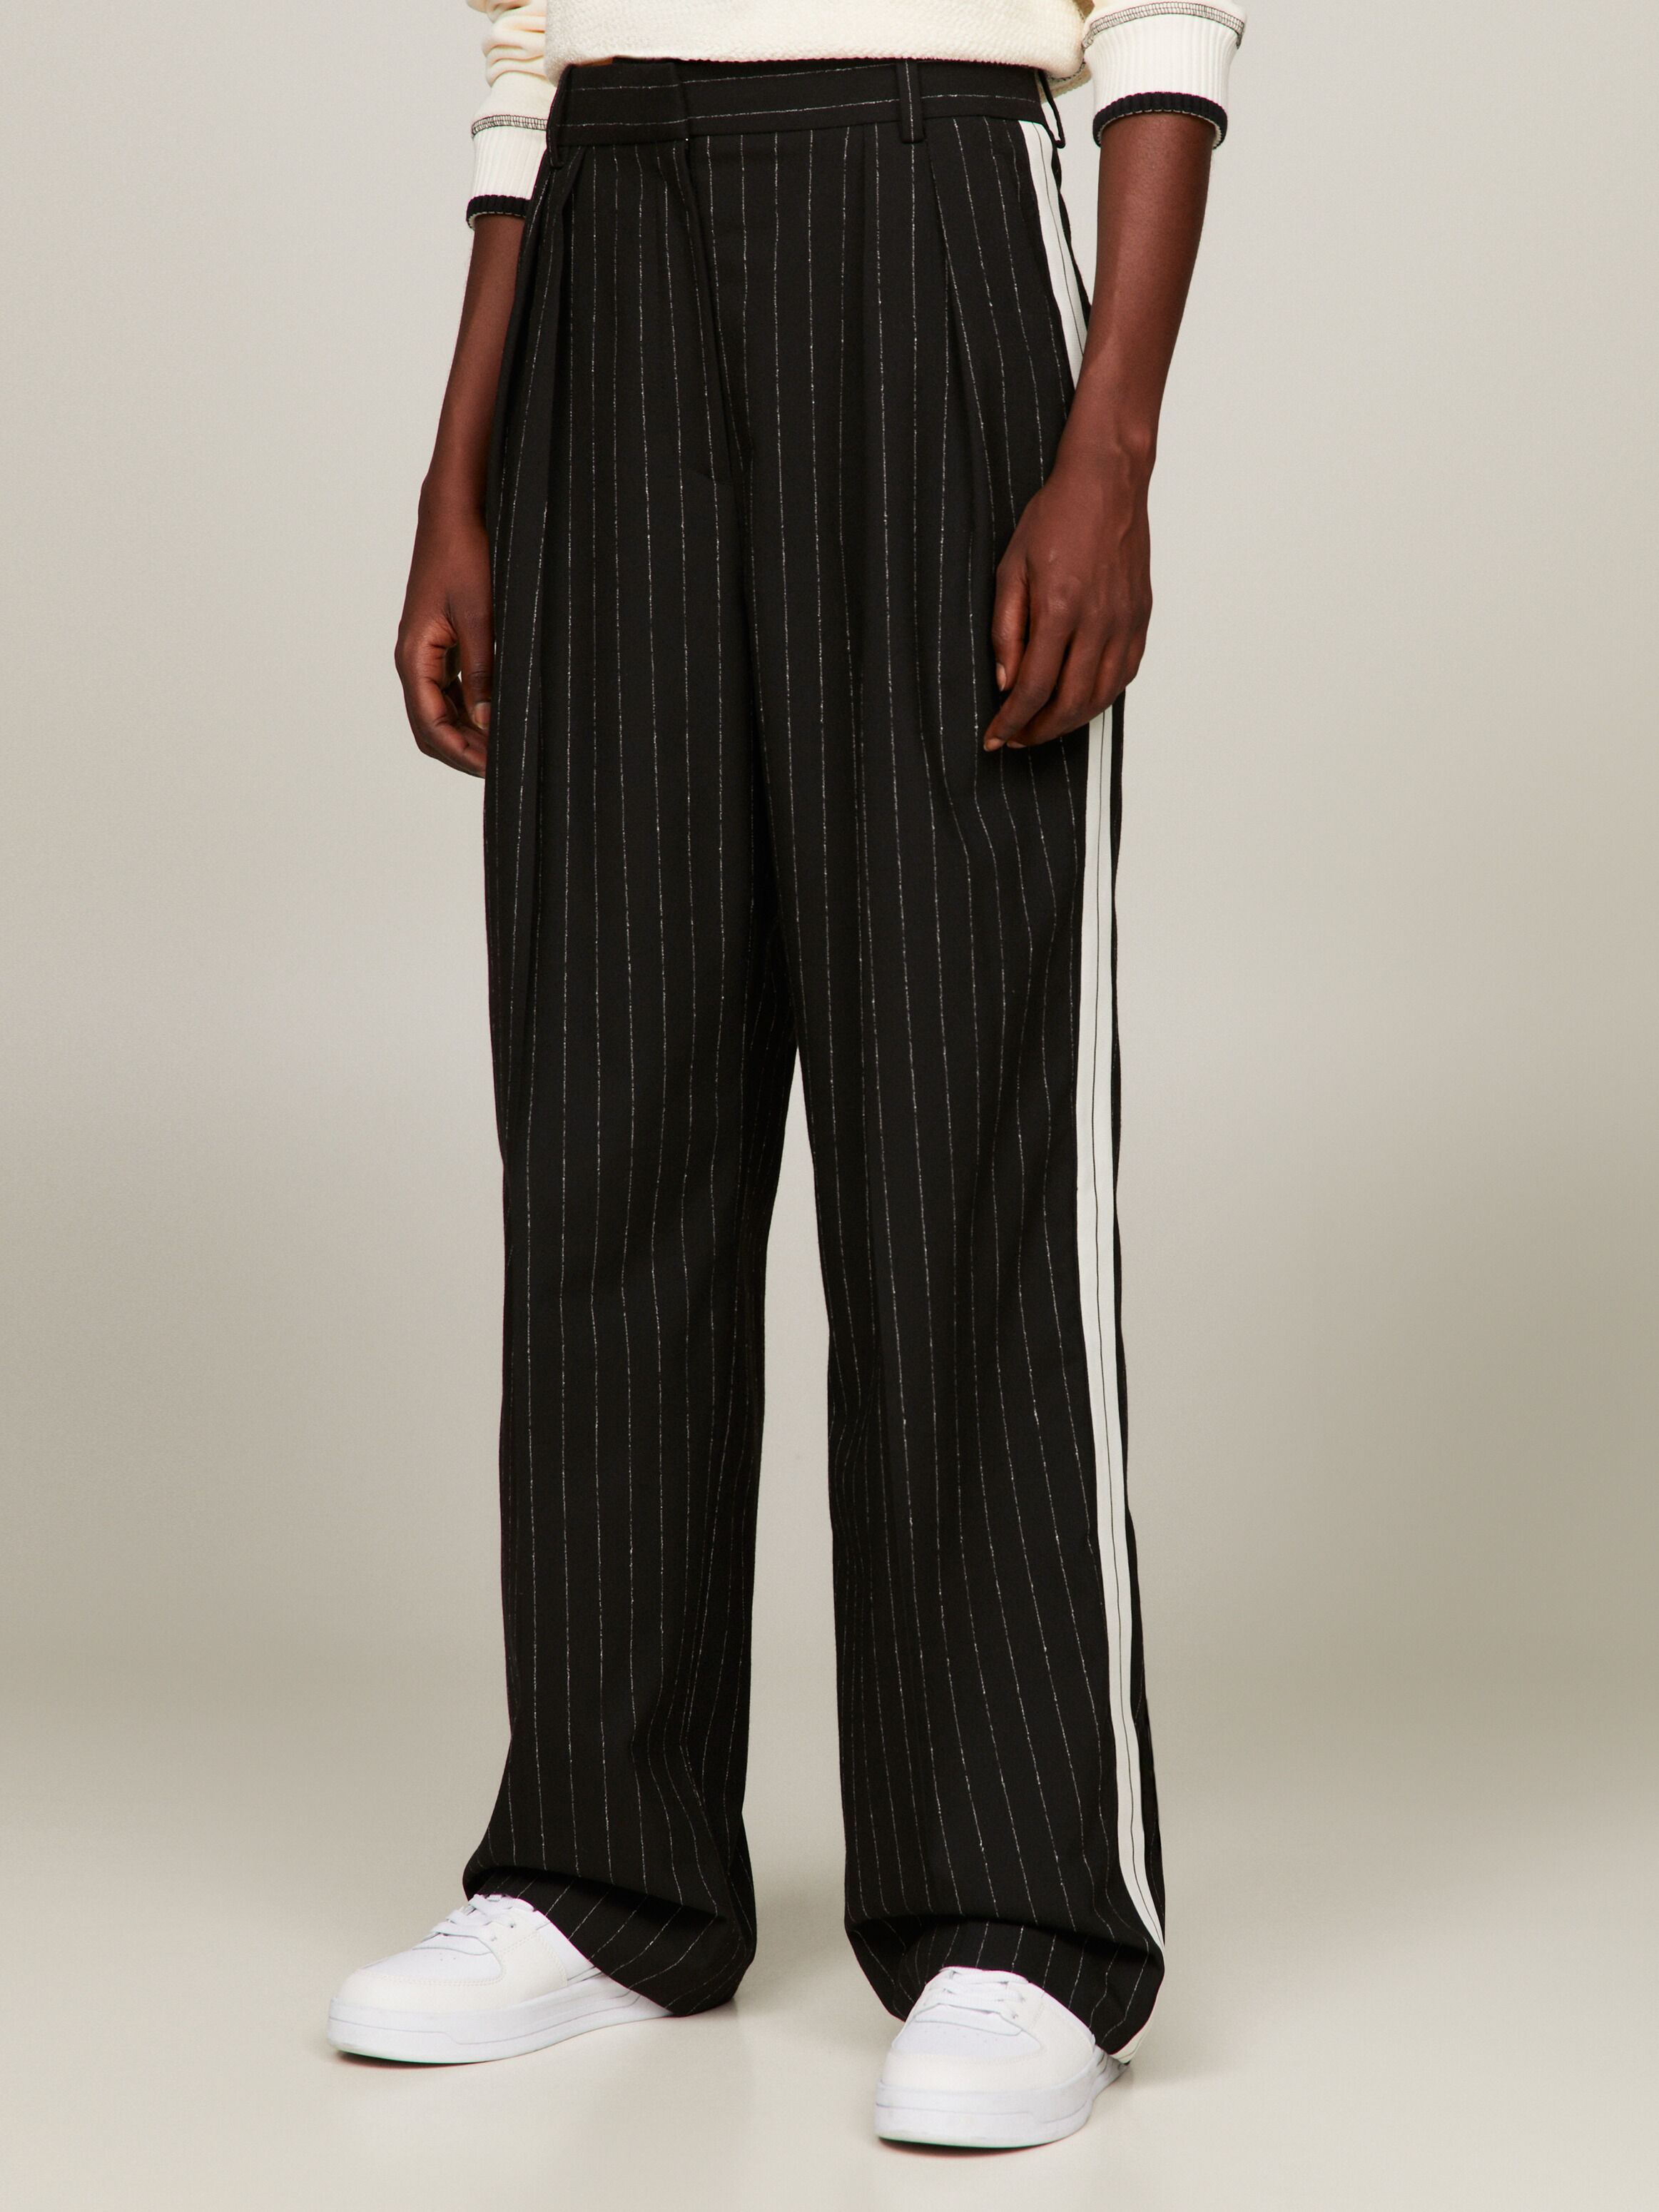 80s Gray Pinstripe Wide Leg Trousers / Small - Etsy